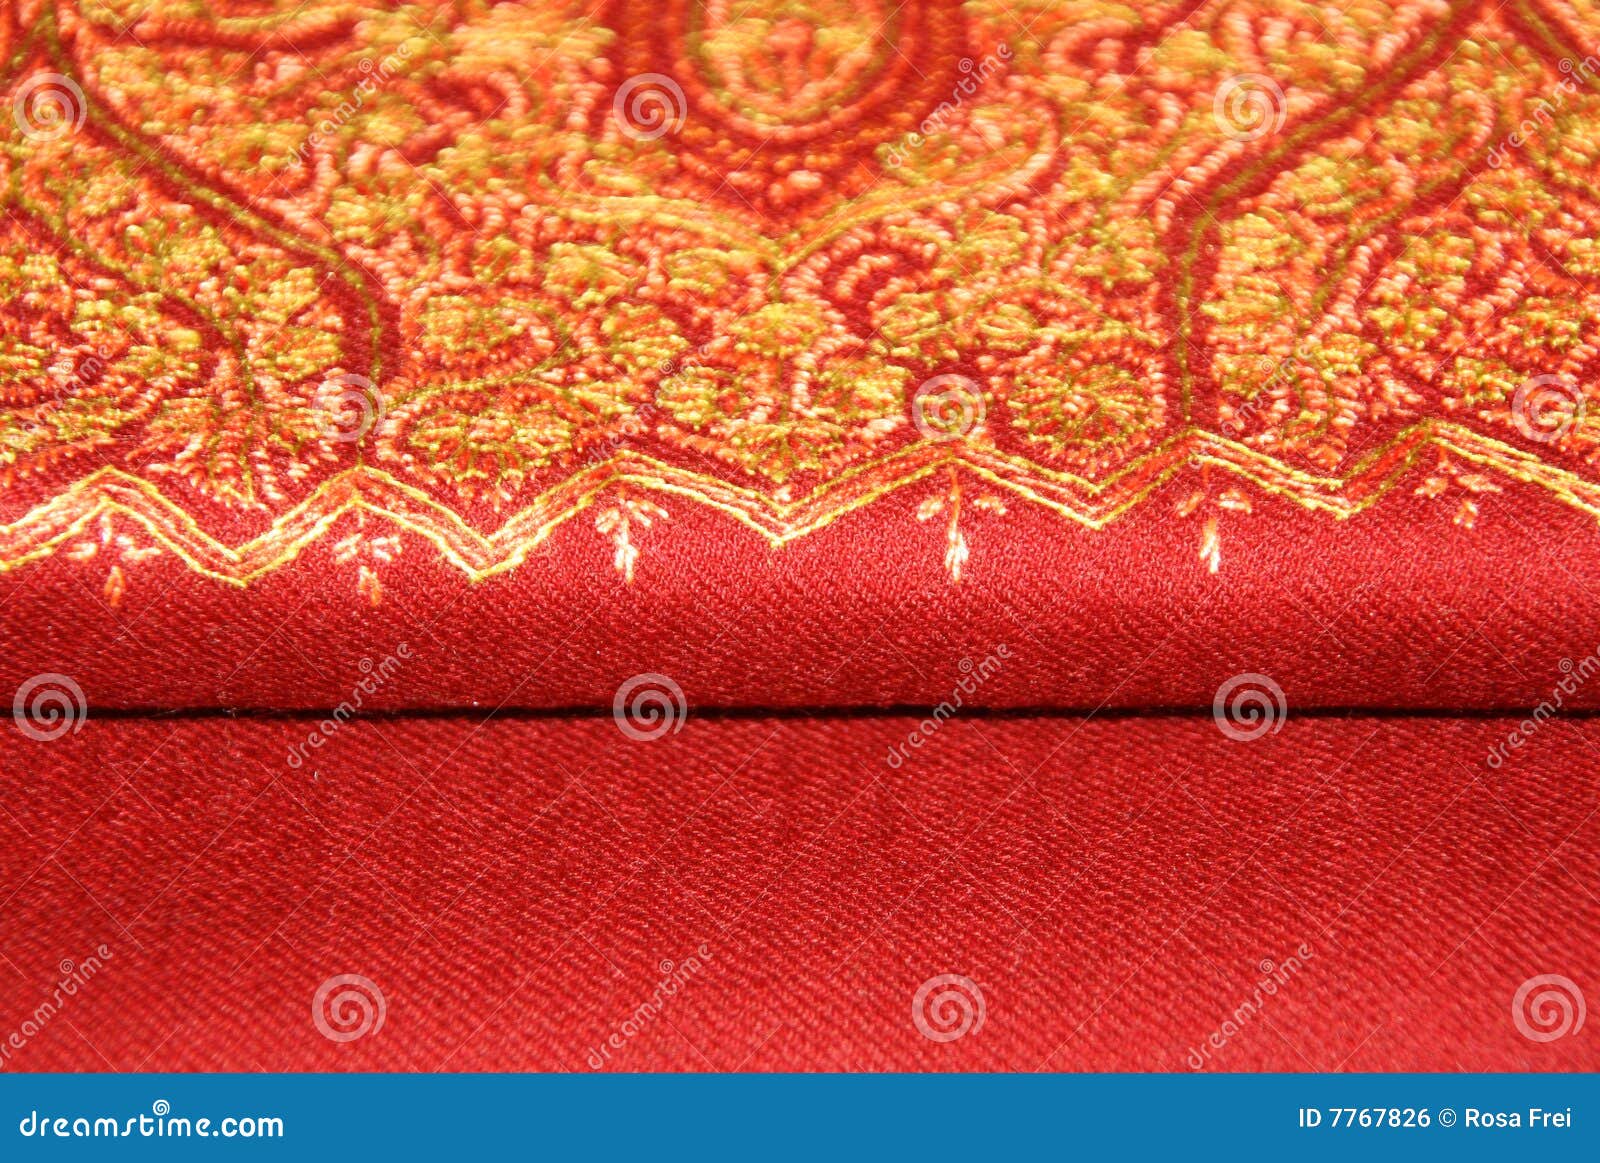 red pashmina shawl with embroidery